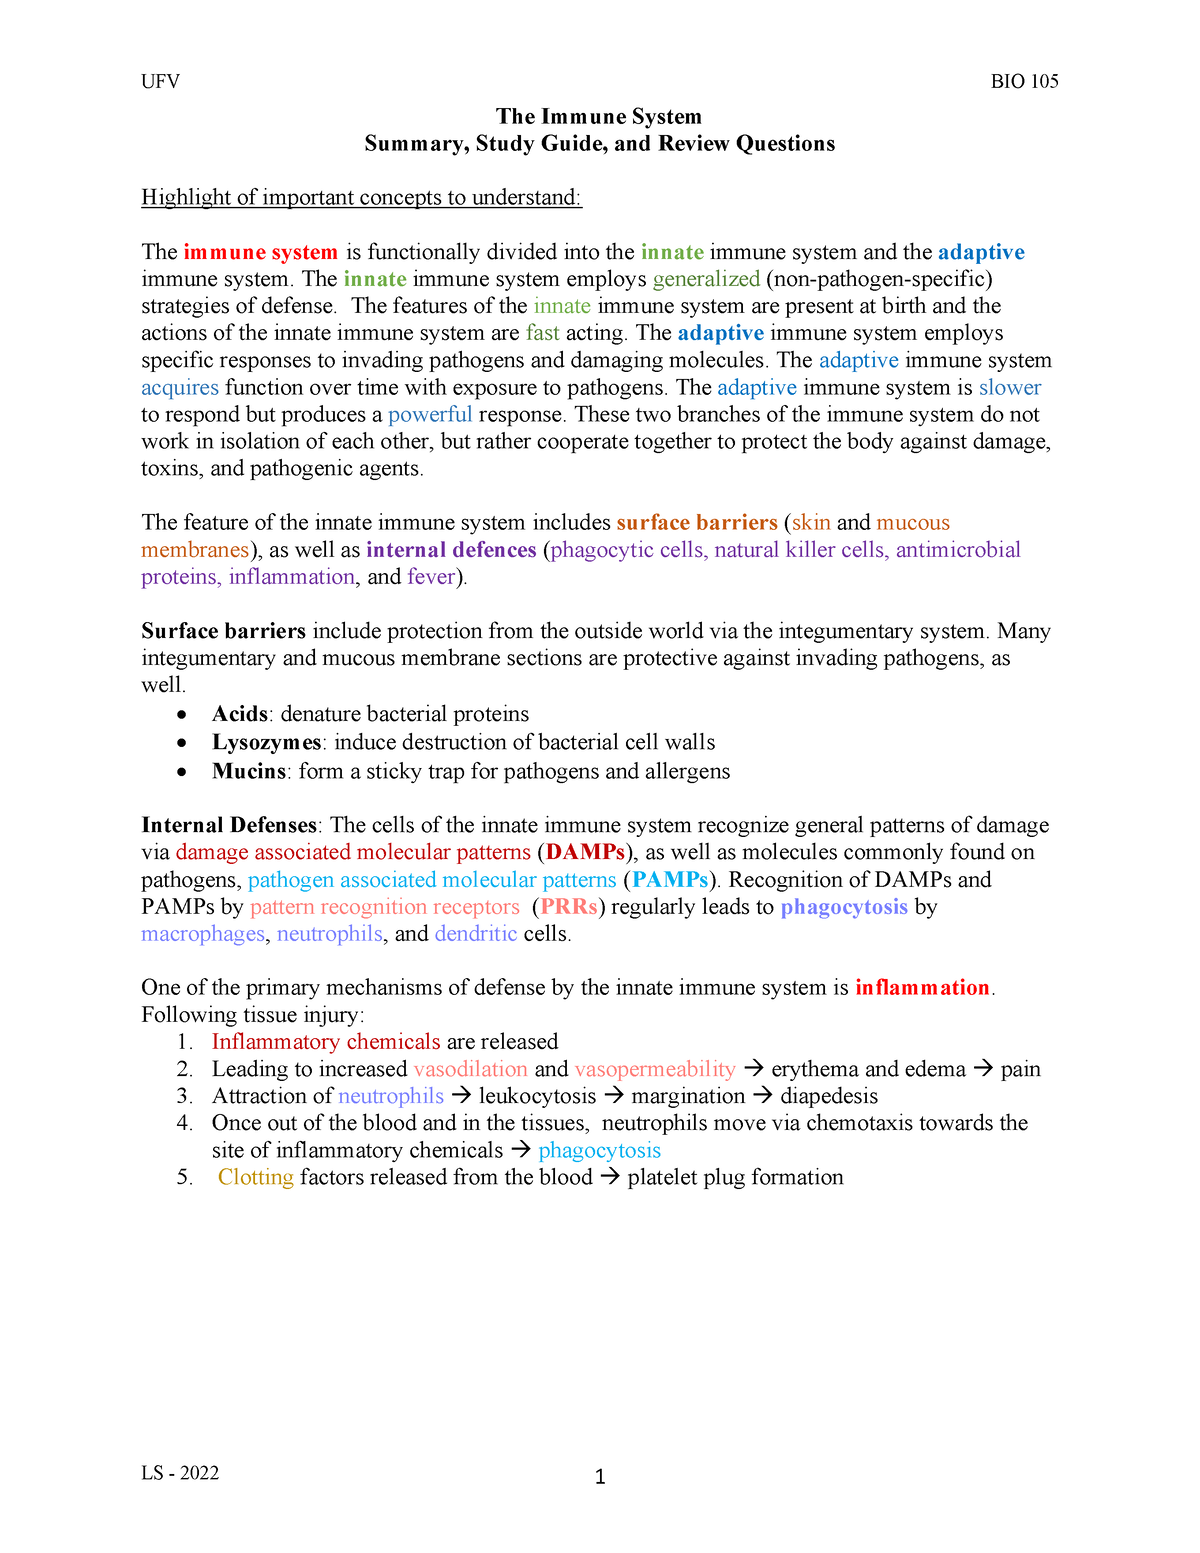 bio-105-module-6-immune-system-summary-and-review-answers-the-immune